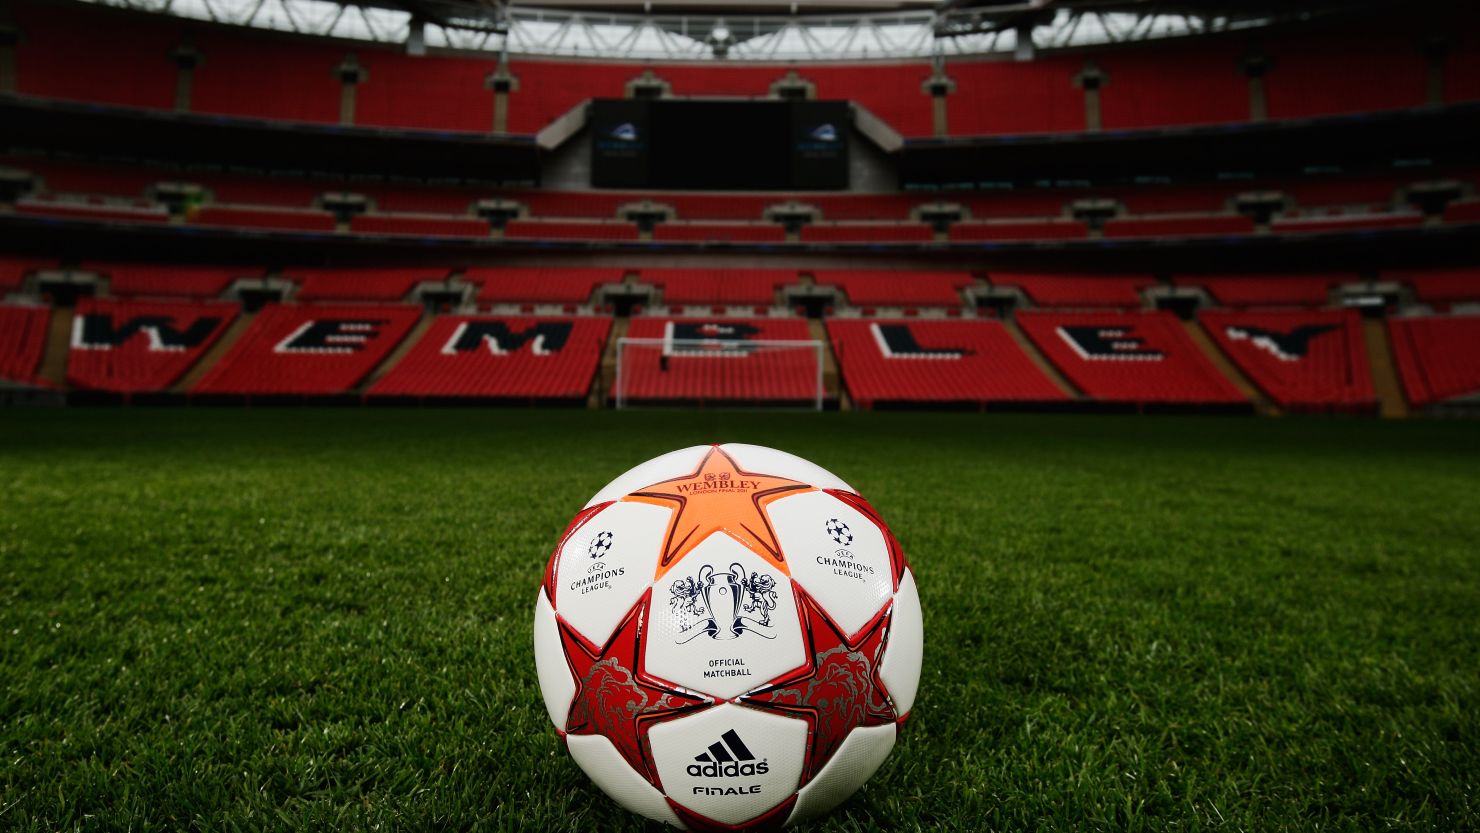 Wembley could play host to the later stages of the European Championship Finals in 2020.